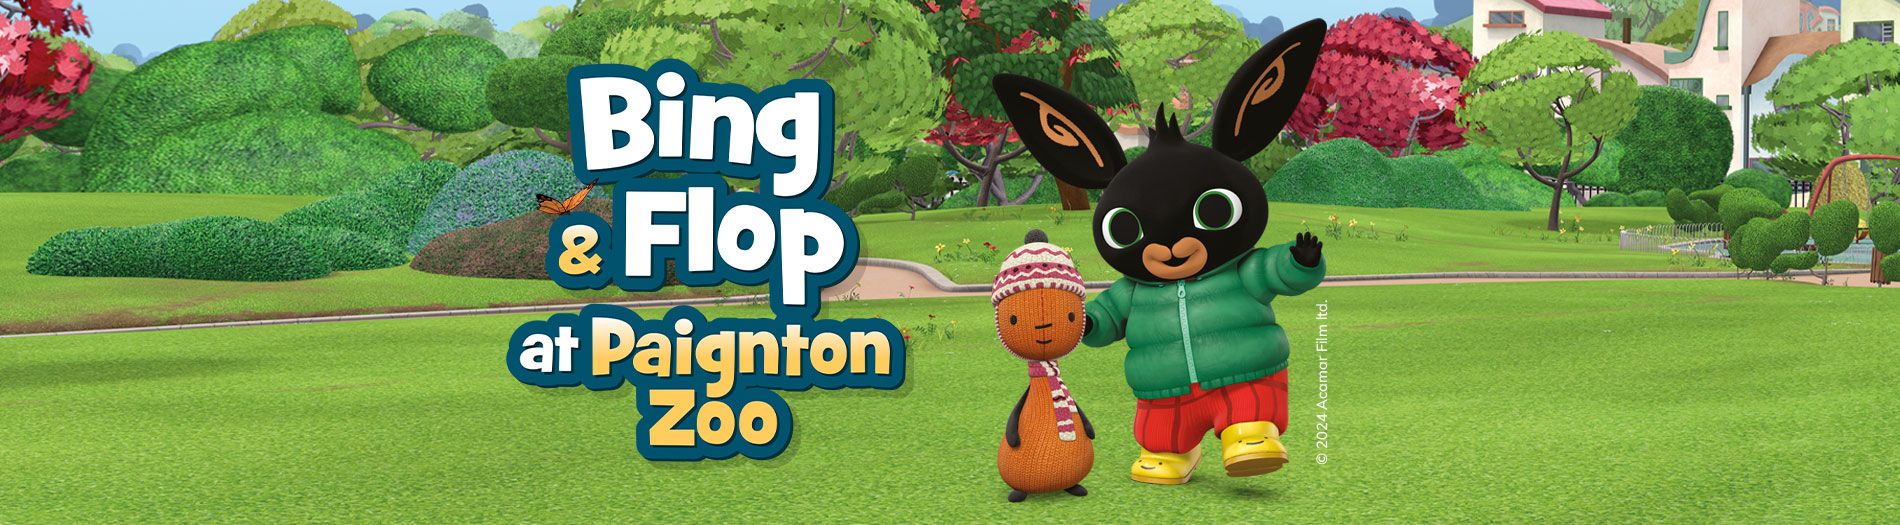 Bing Flop Paigntony Zoo event banner